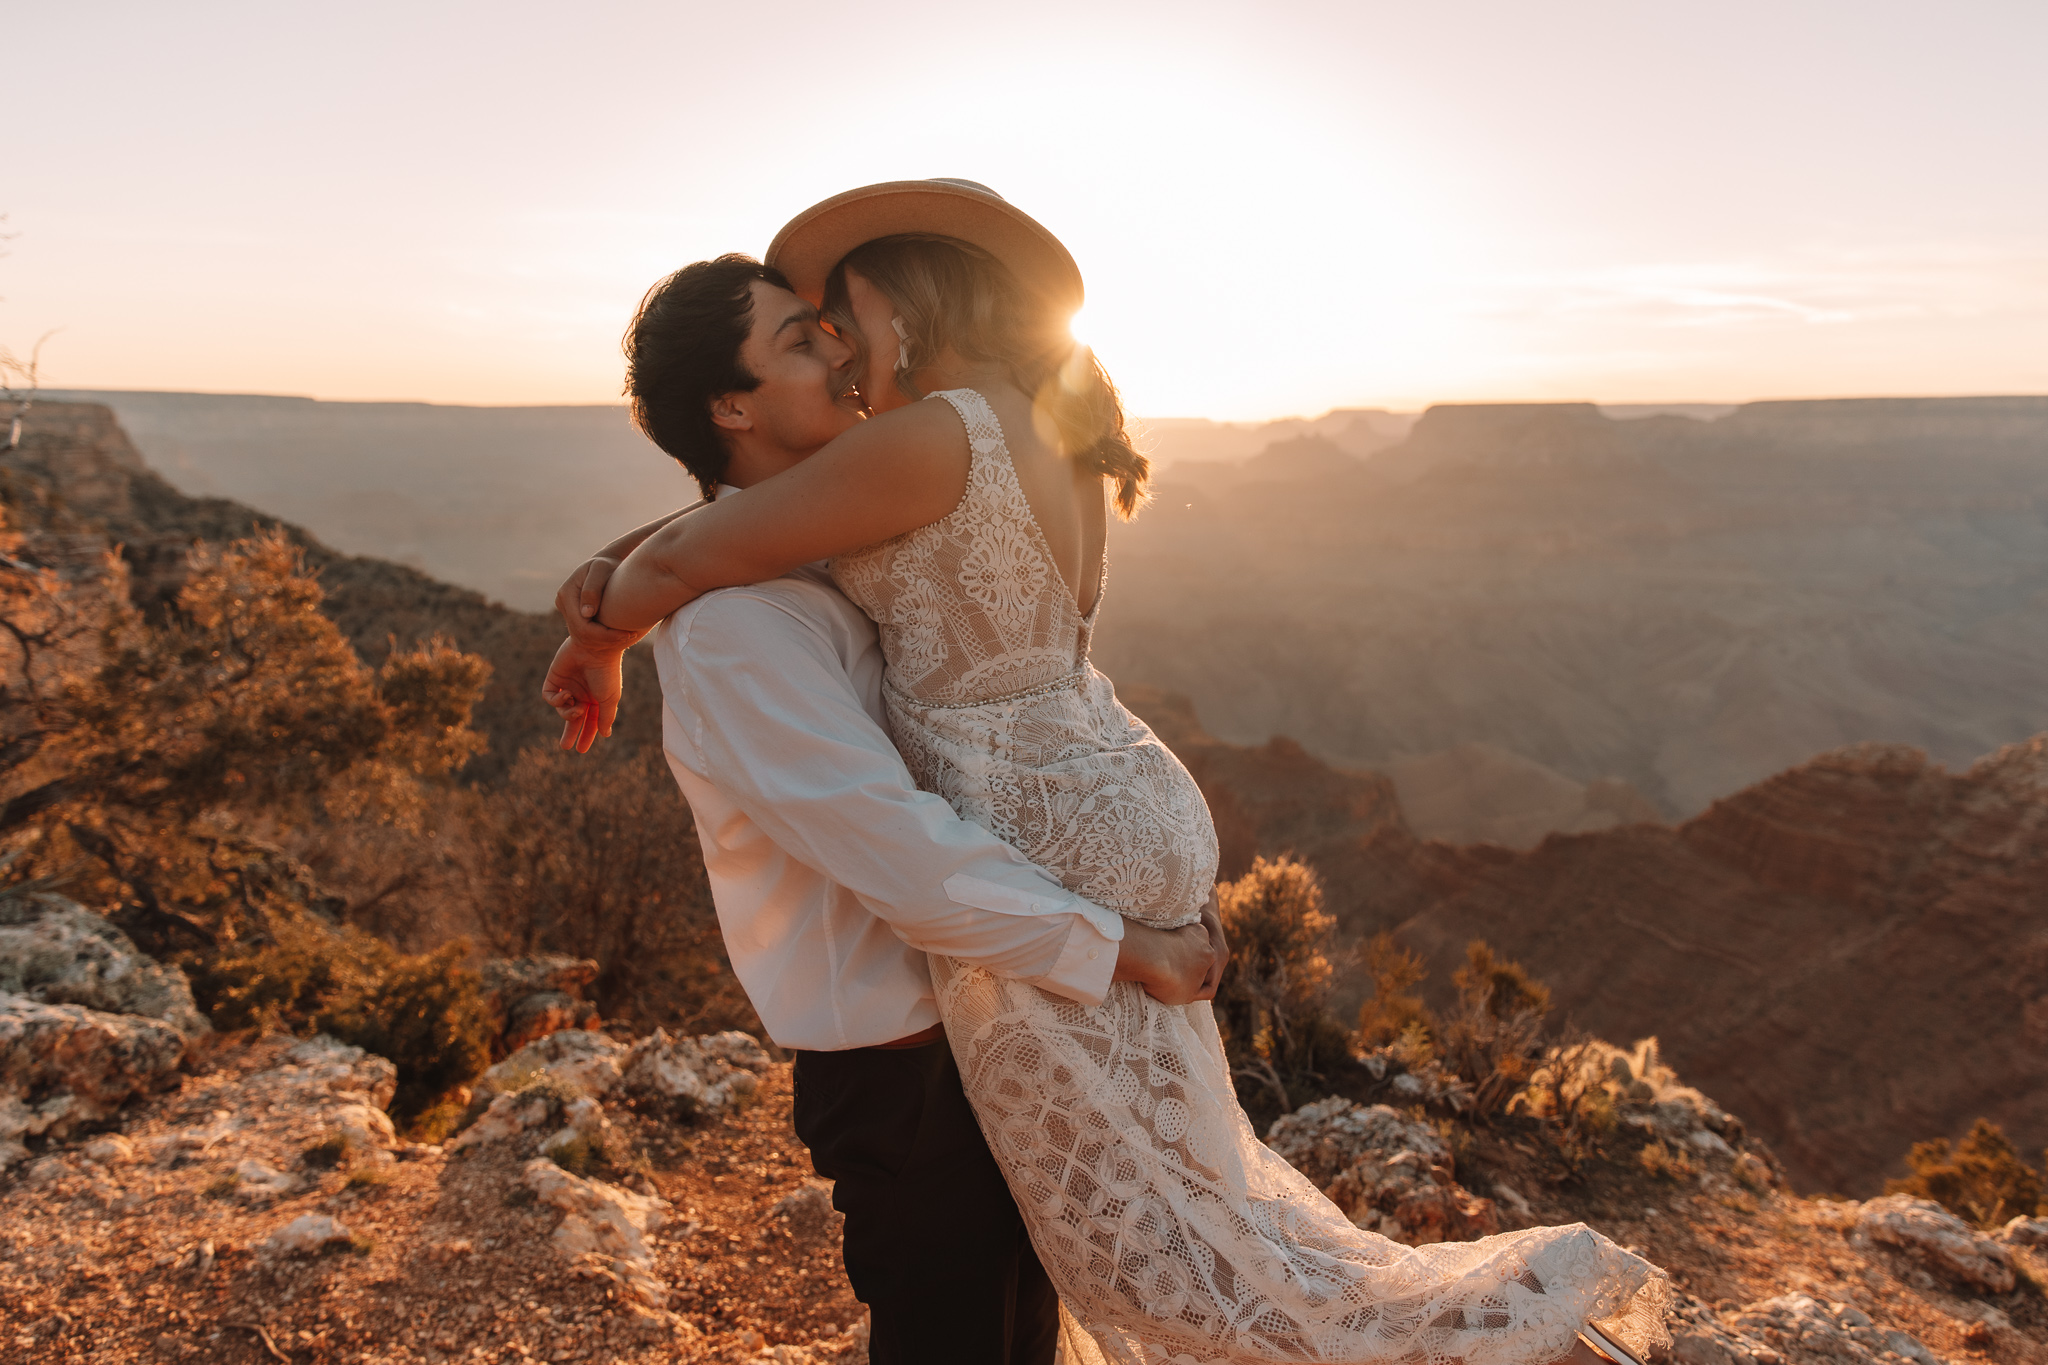 Grand Canyon elopement couple at Navajo point taken by Elopement photographer Heidi Straus